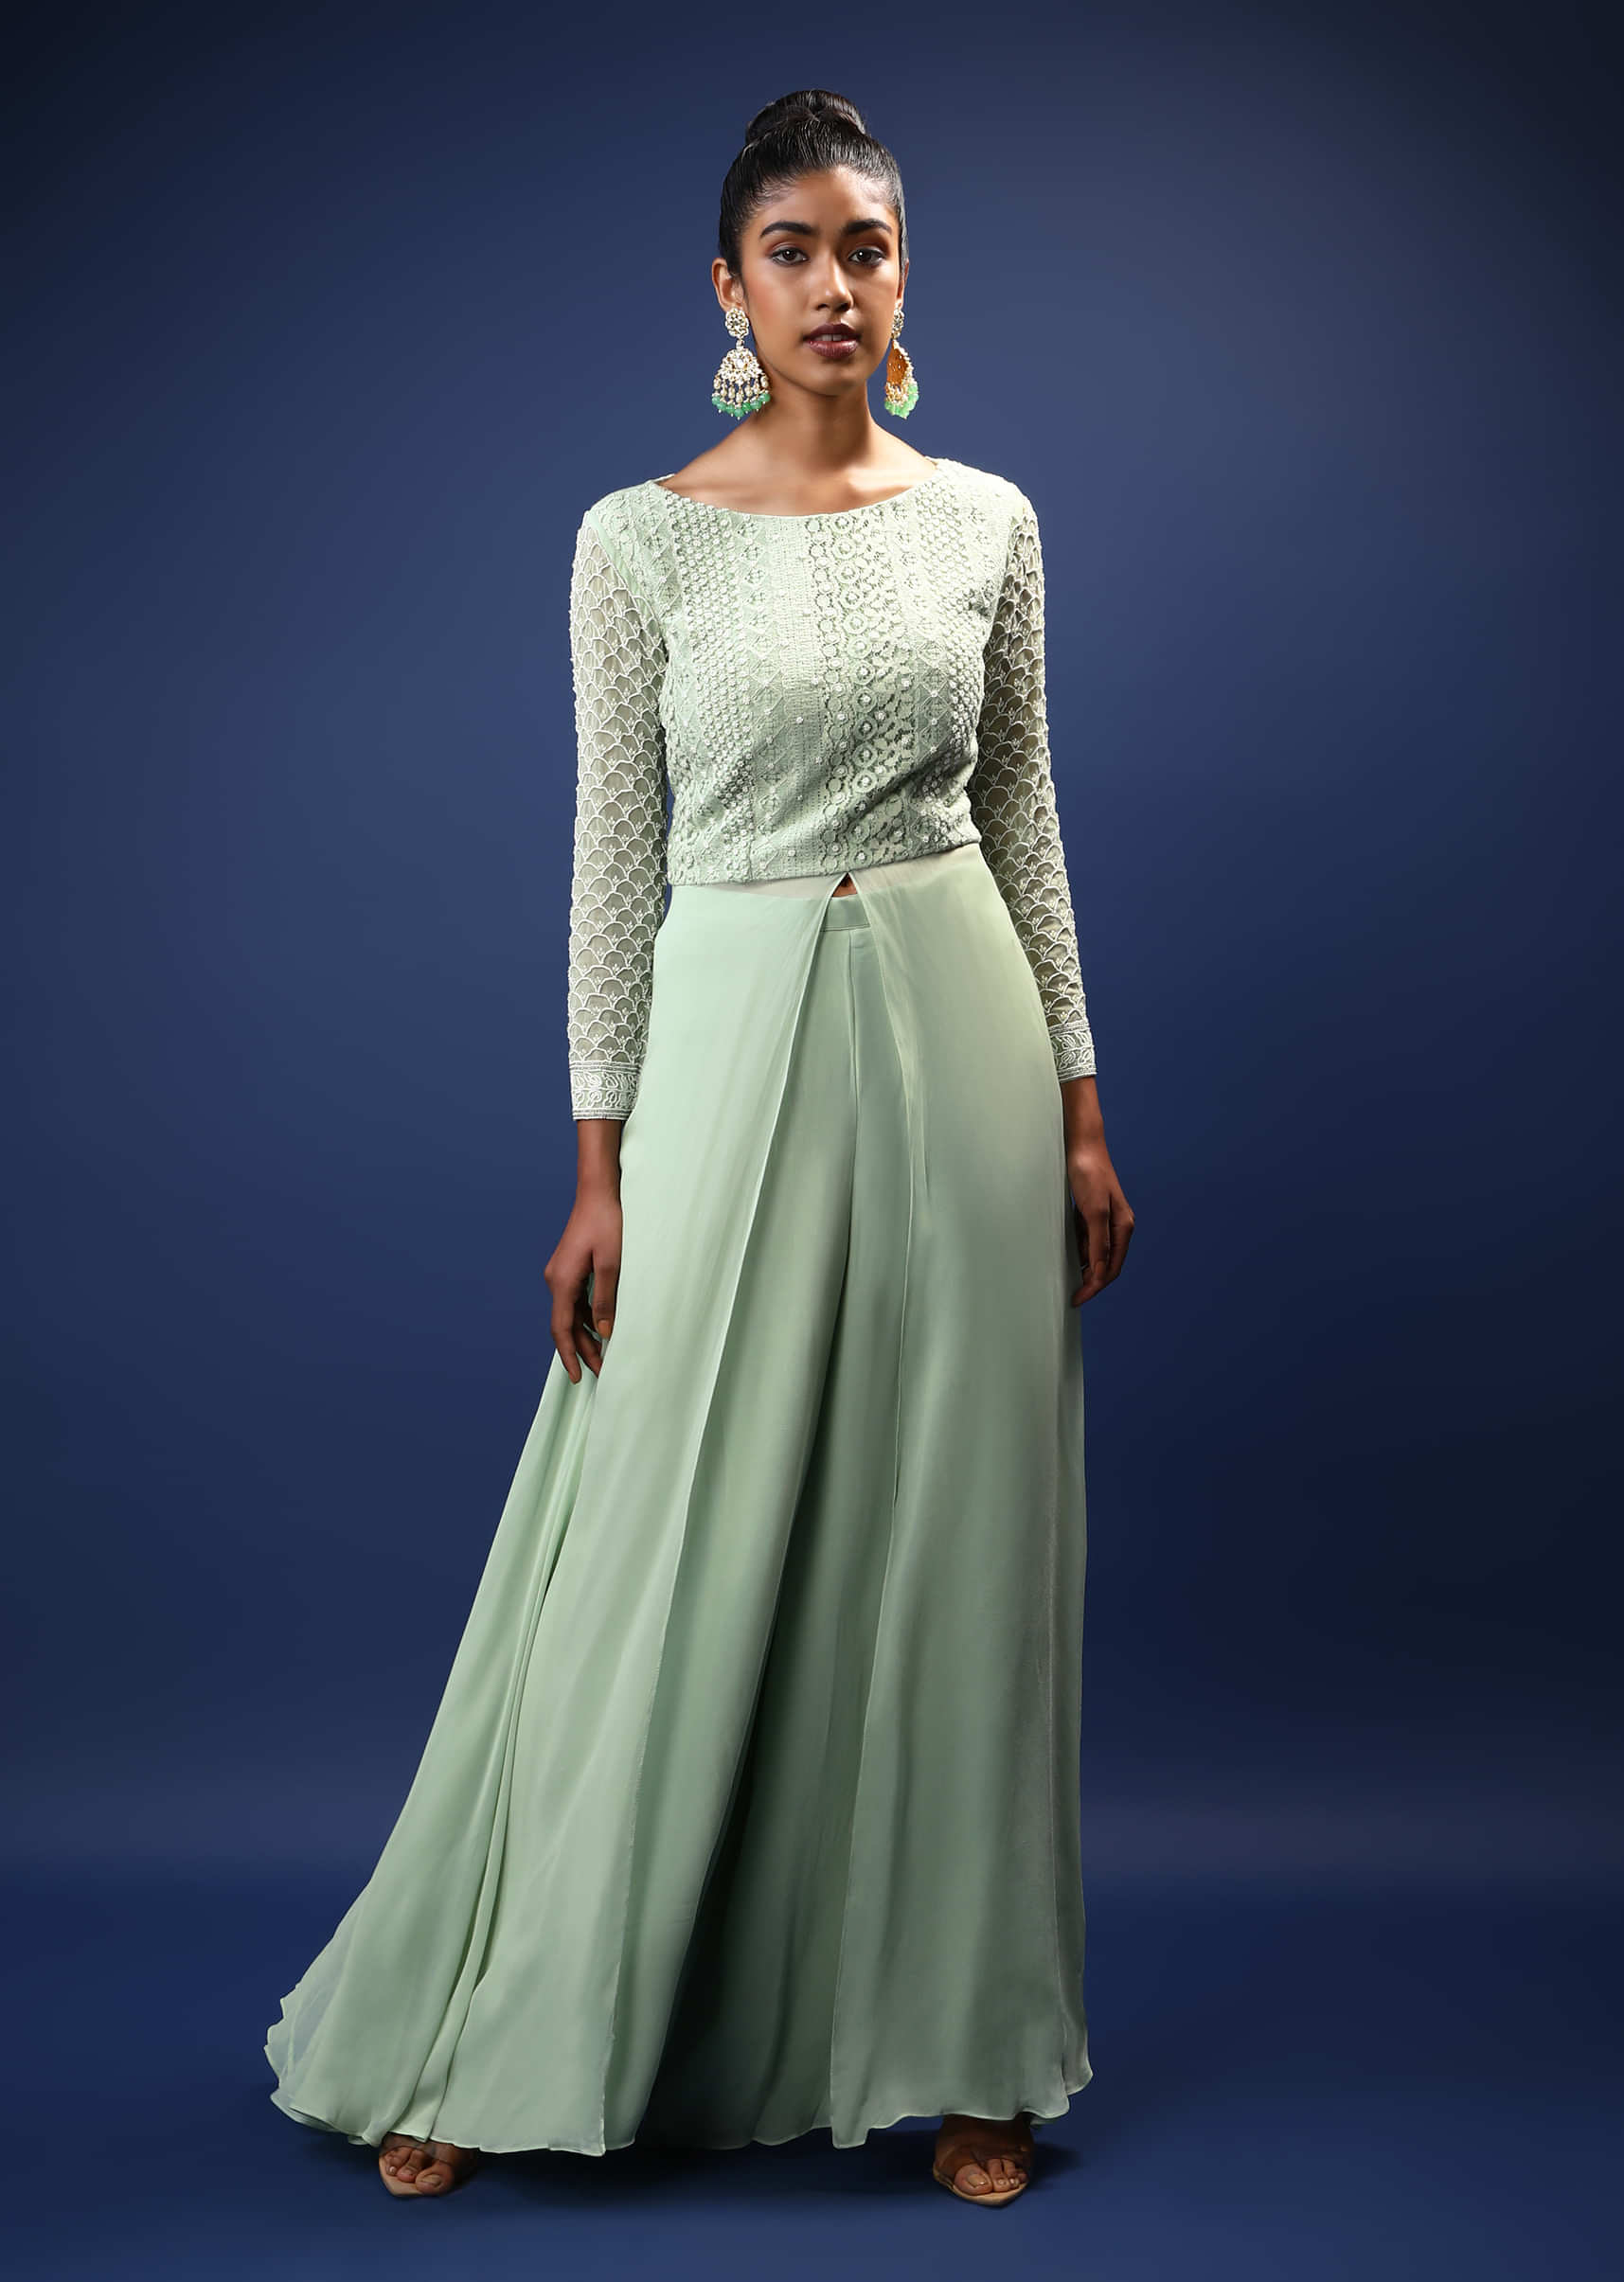 Pastel Green Palazzo Suit In Georgette With A Long Slit Top In Crochet Lace Adorned In Moti Bead Detailing  